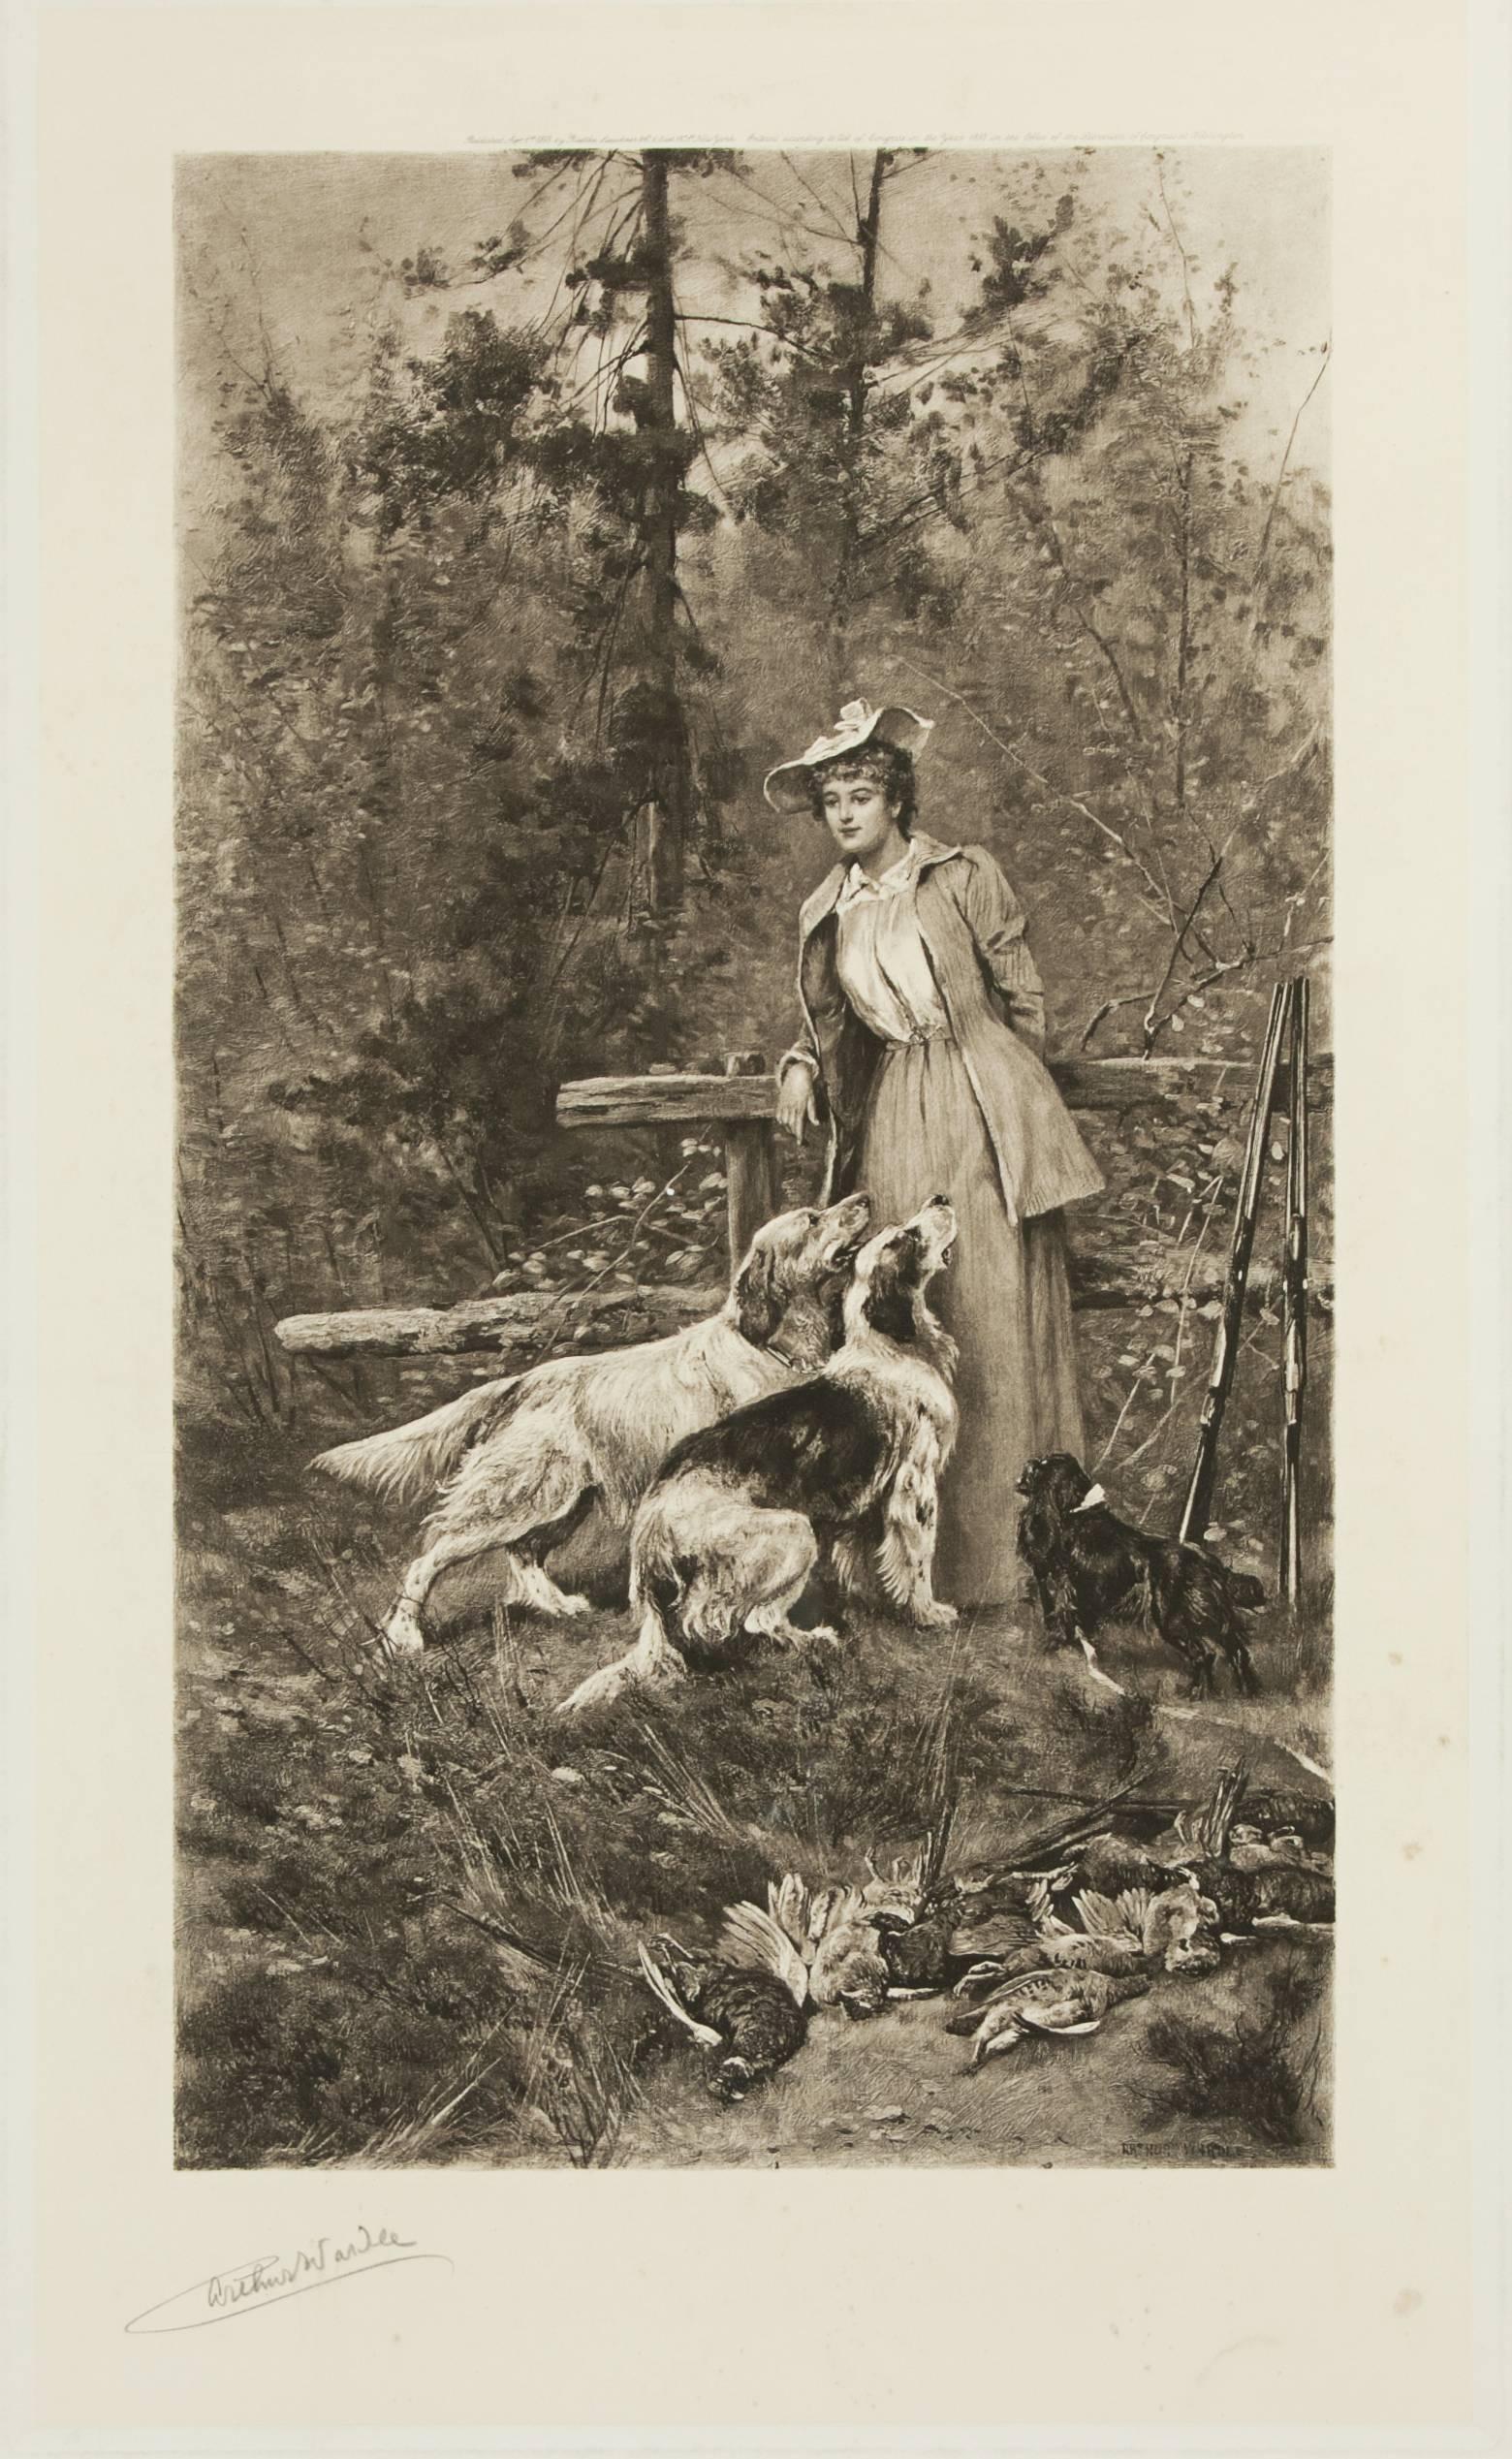 A rare shooting photogravure of a female subject by Arthur Wardle. As well as being unusual to have a female subject it is also an unusual portrait. It is framed and mounted in a modern wooden frame. The feminine shooting picture is signed by the